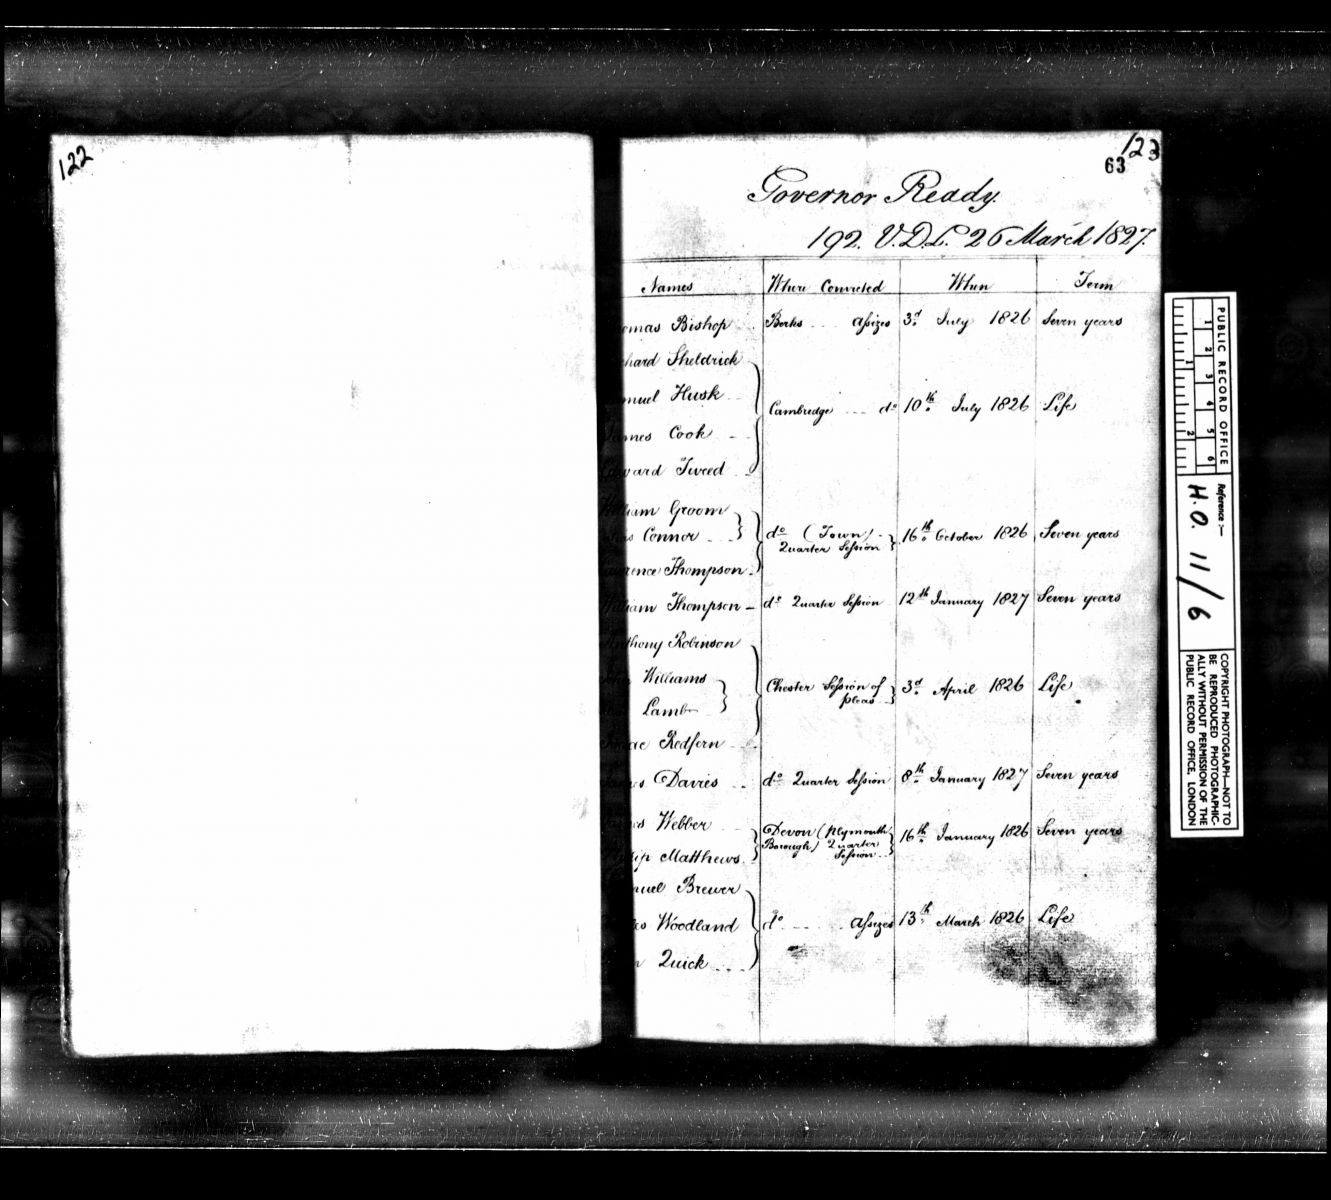 Extract from Transportation Registers showing William Groom